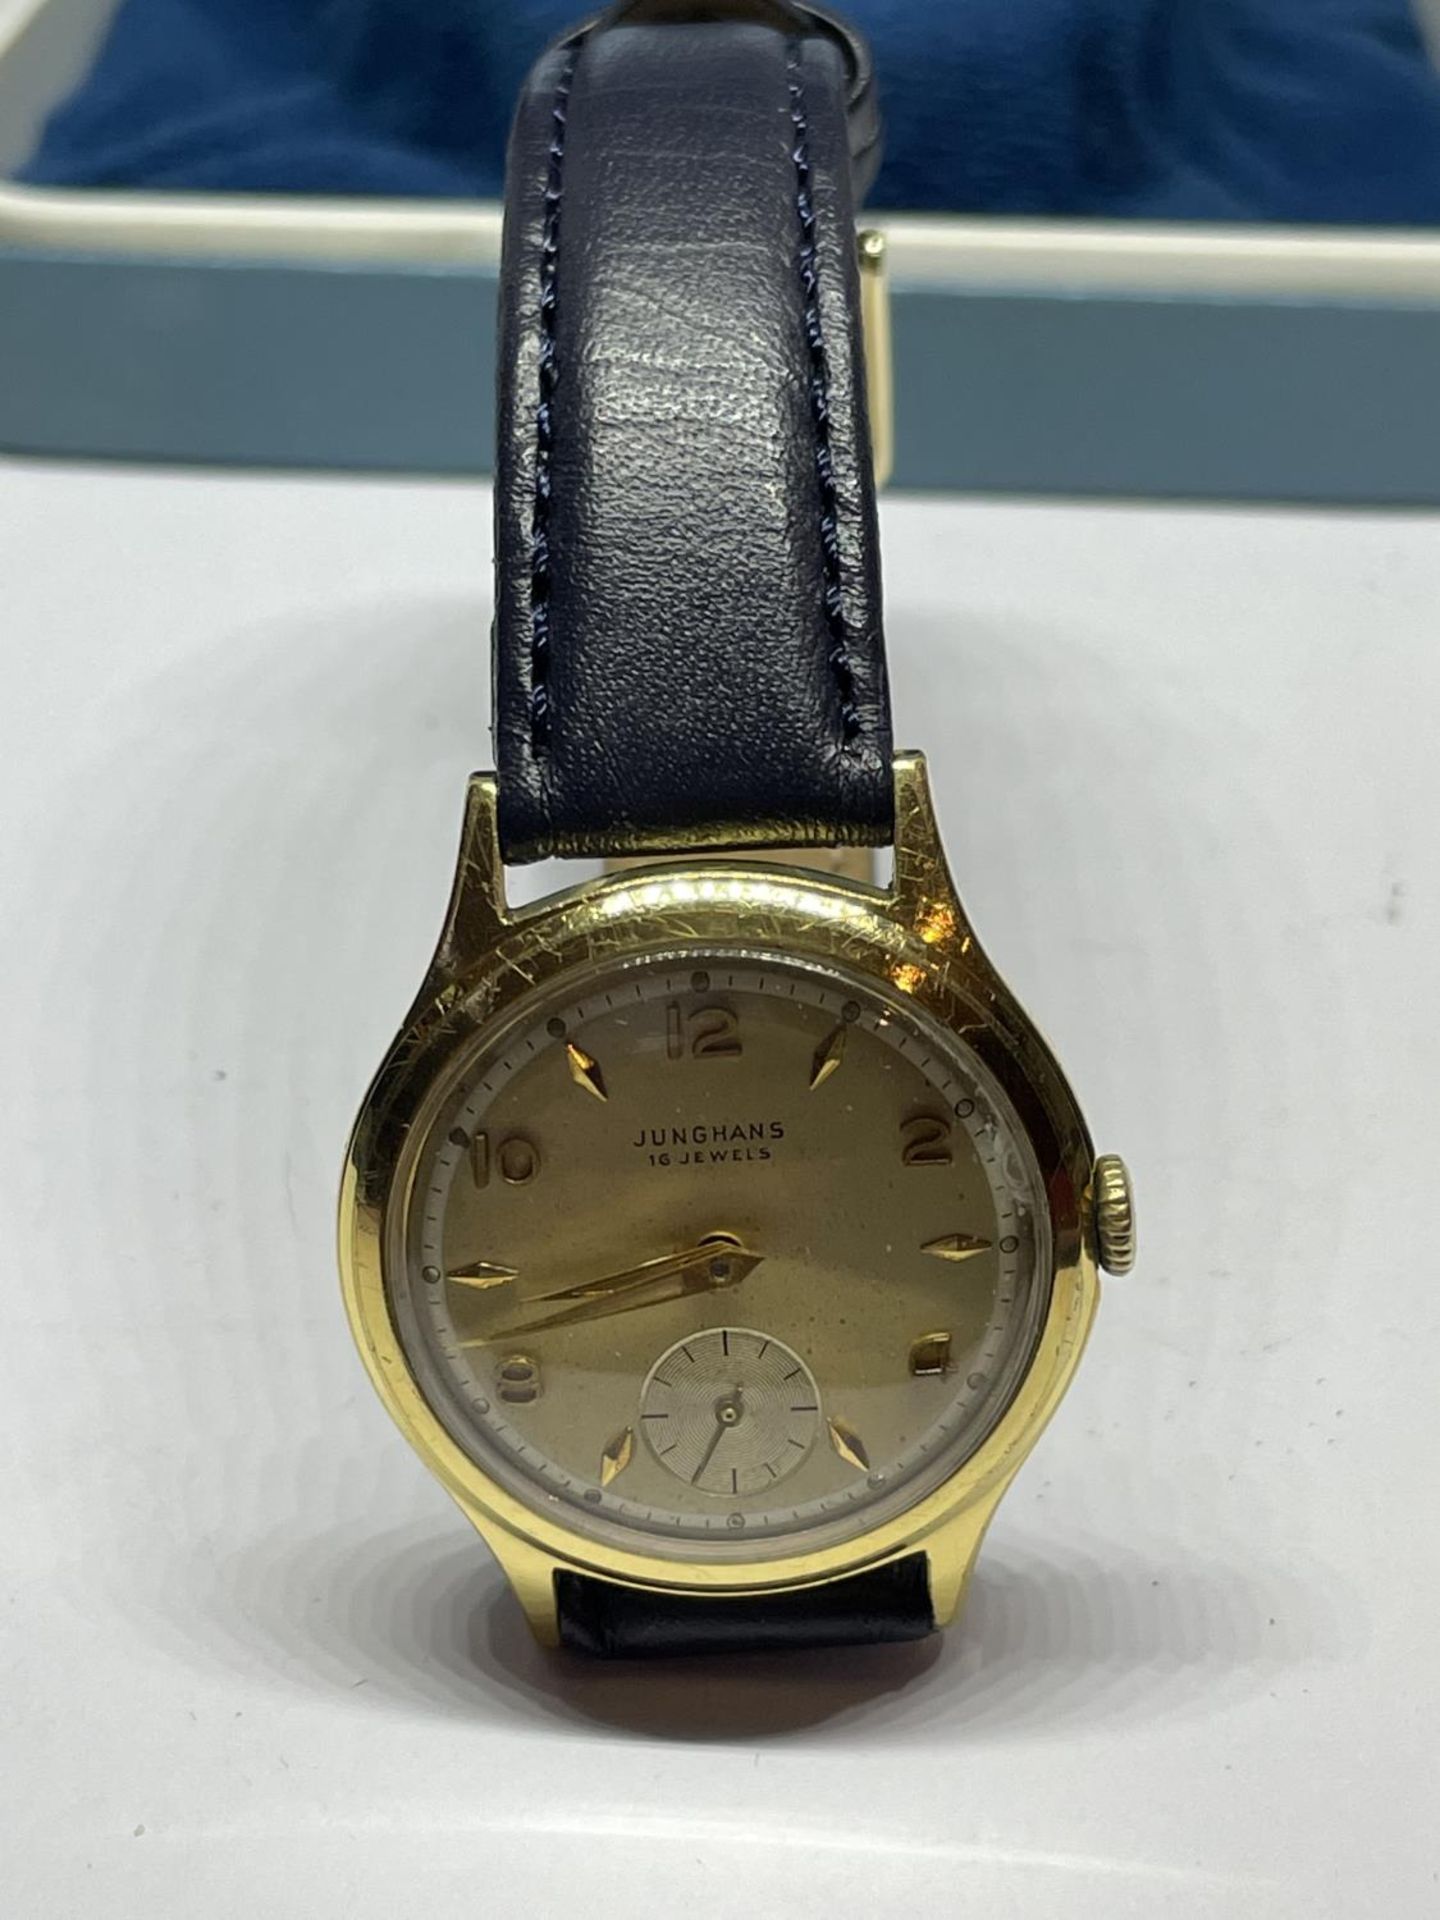 A JUNGHANS WWII WRIST WATCH SEEN WORKING BUT NO WARRANTY IN A PRESENTATION BOX - Image 2 of 4